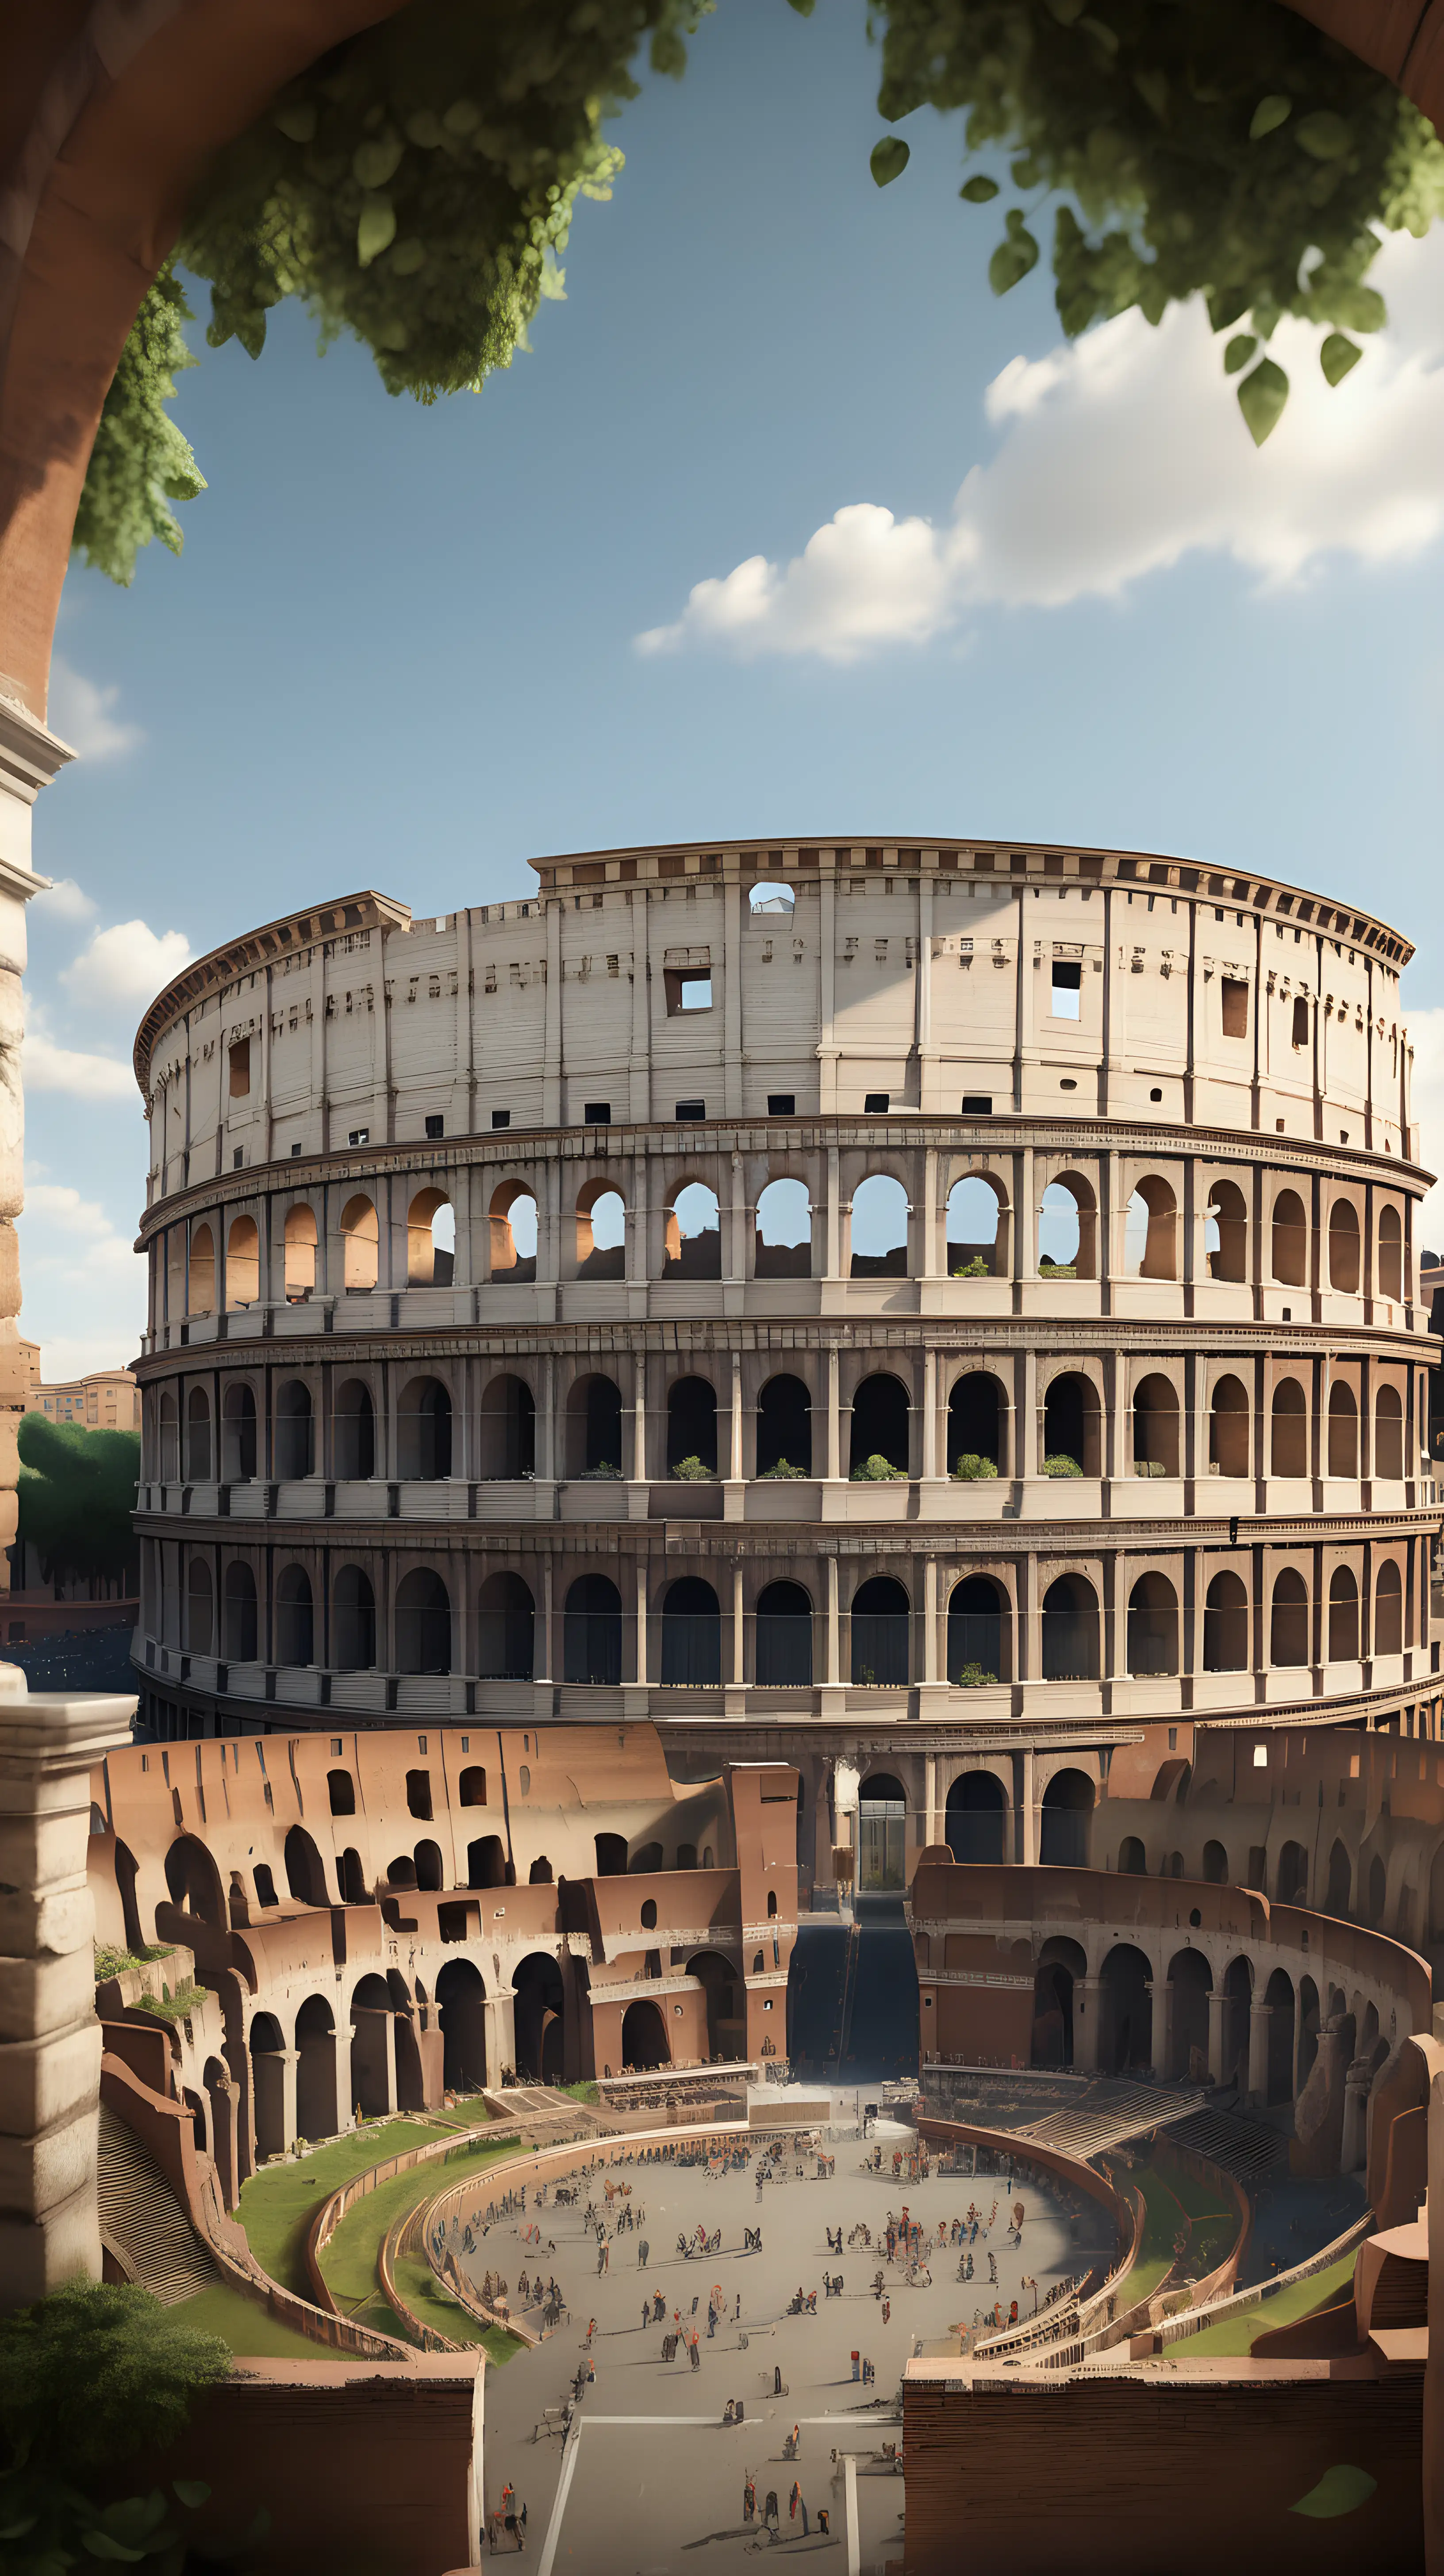 Iconic Colosseum in Rome Capturing Historical Grandeur with HighQuality Imagery